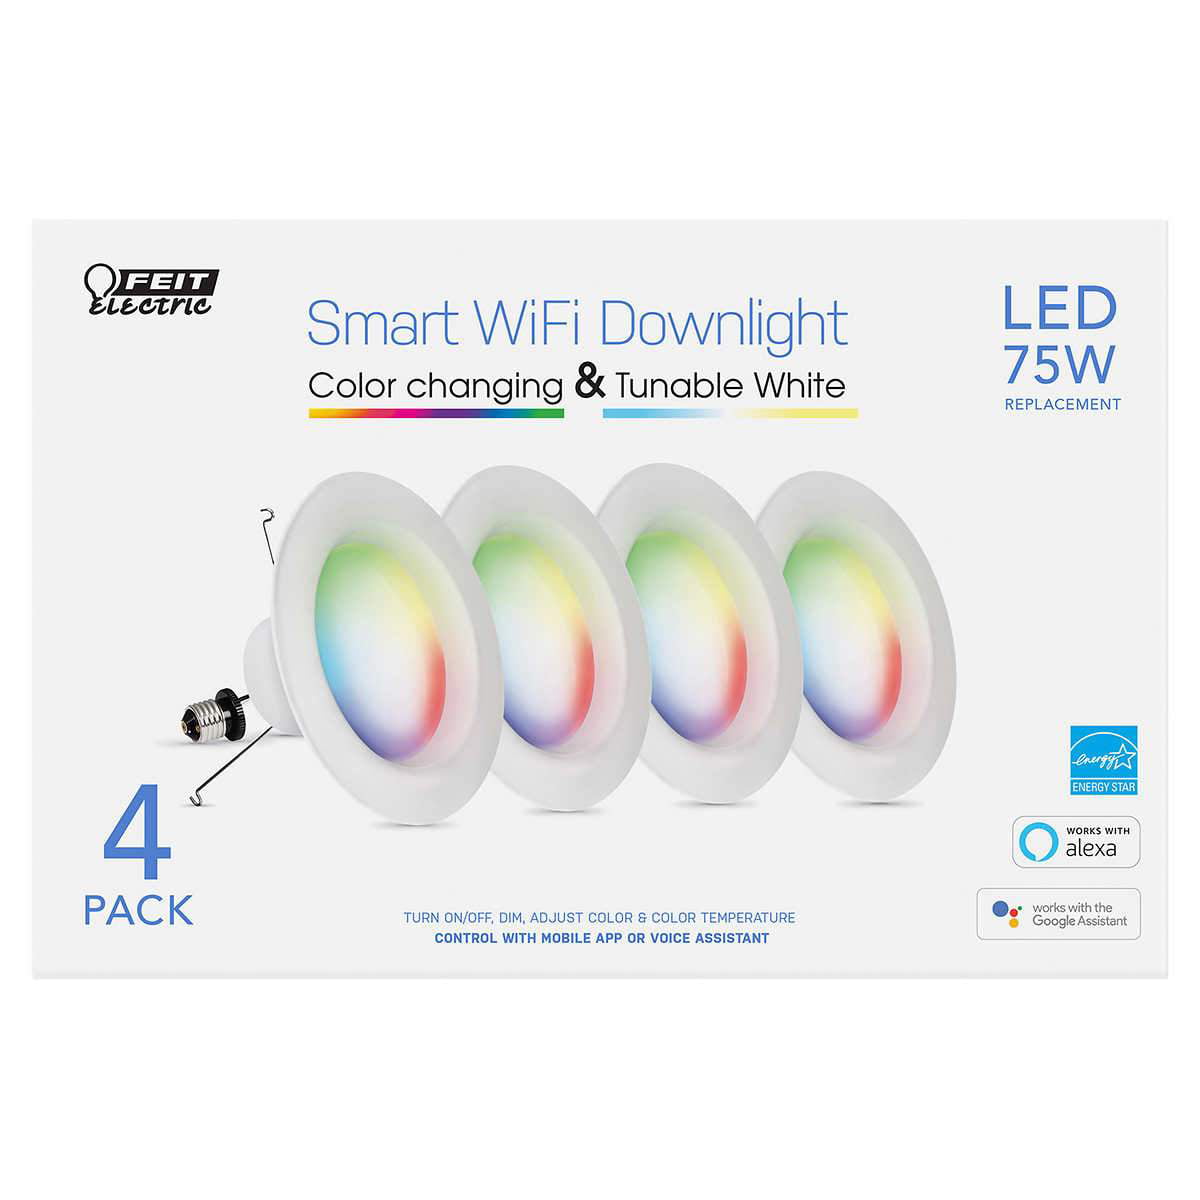 Feit Smart Wi-Fi Downlight LED 75W Retrofit Replacement Color Changing NEW 